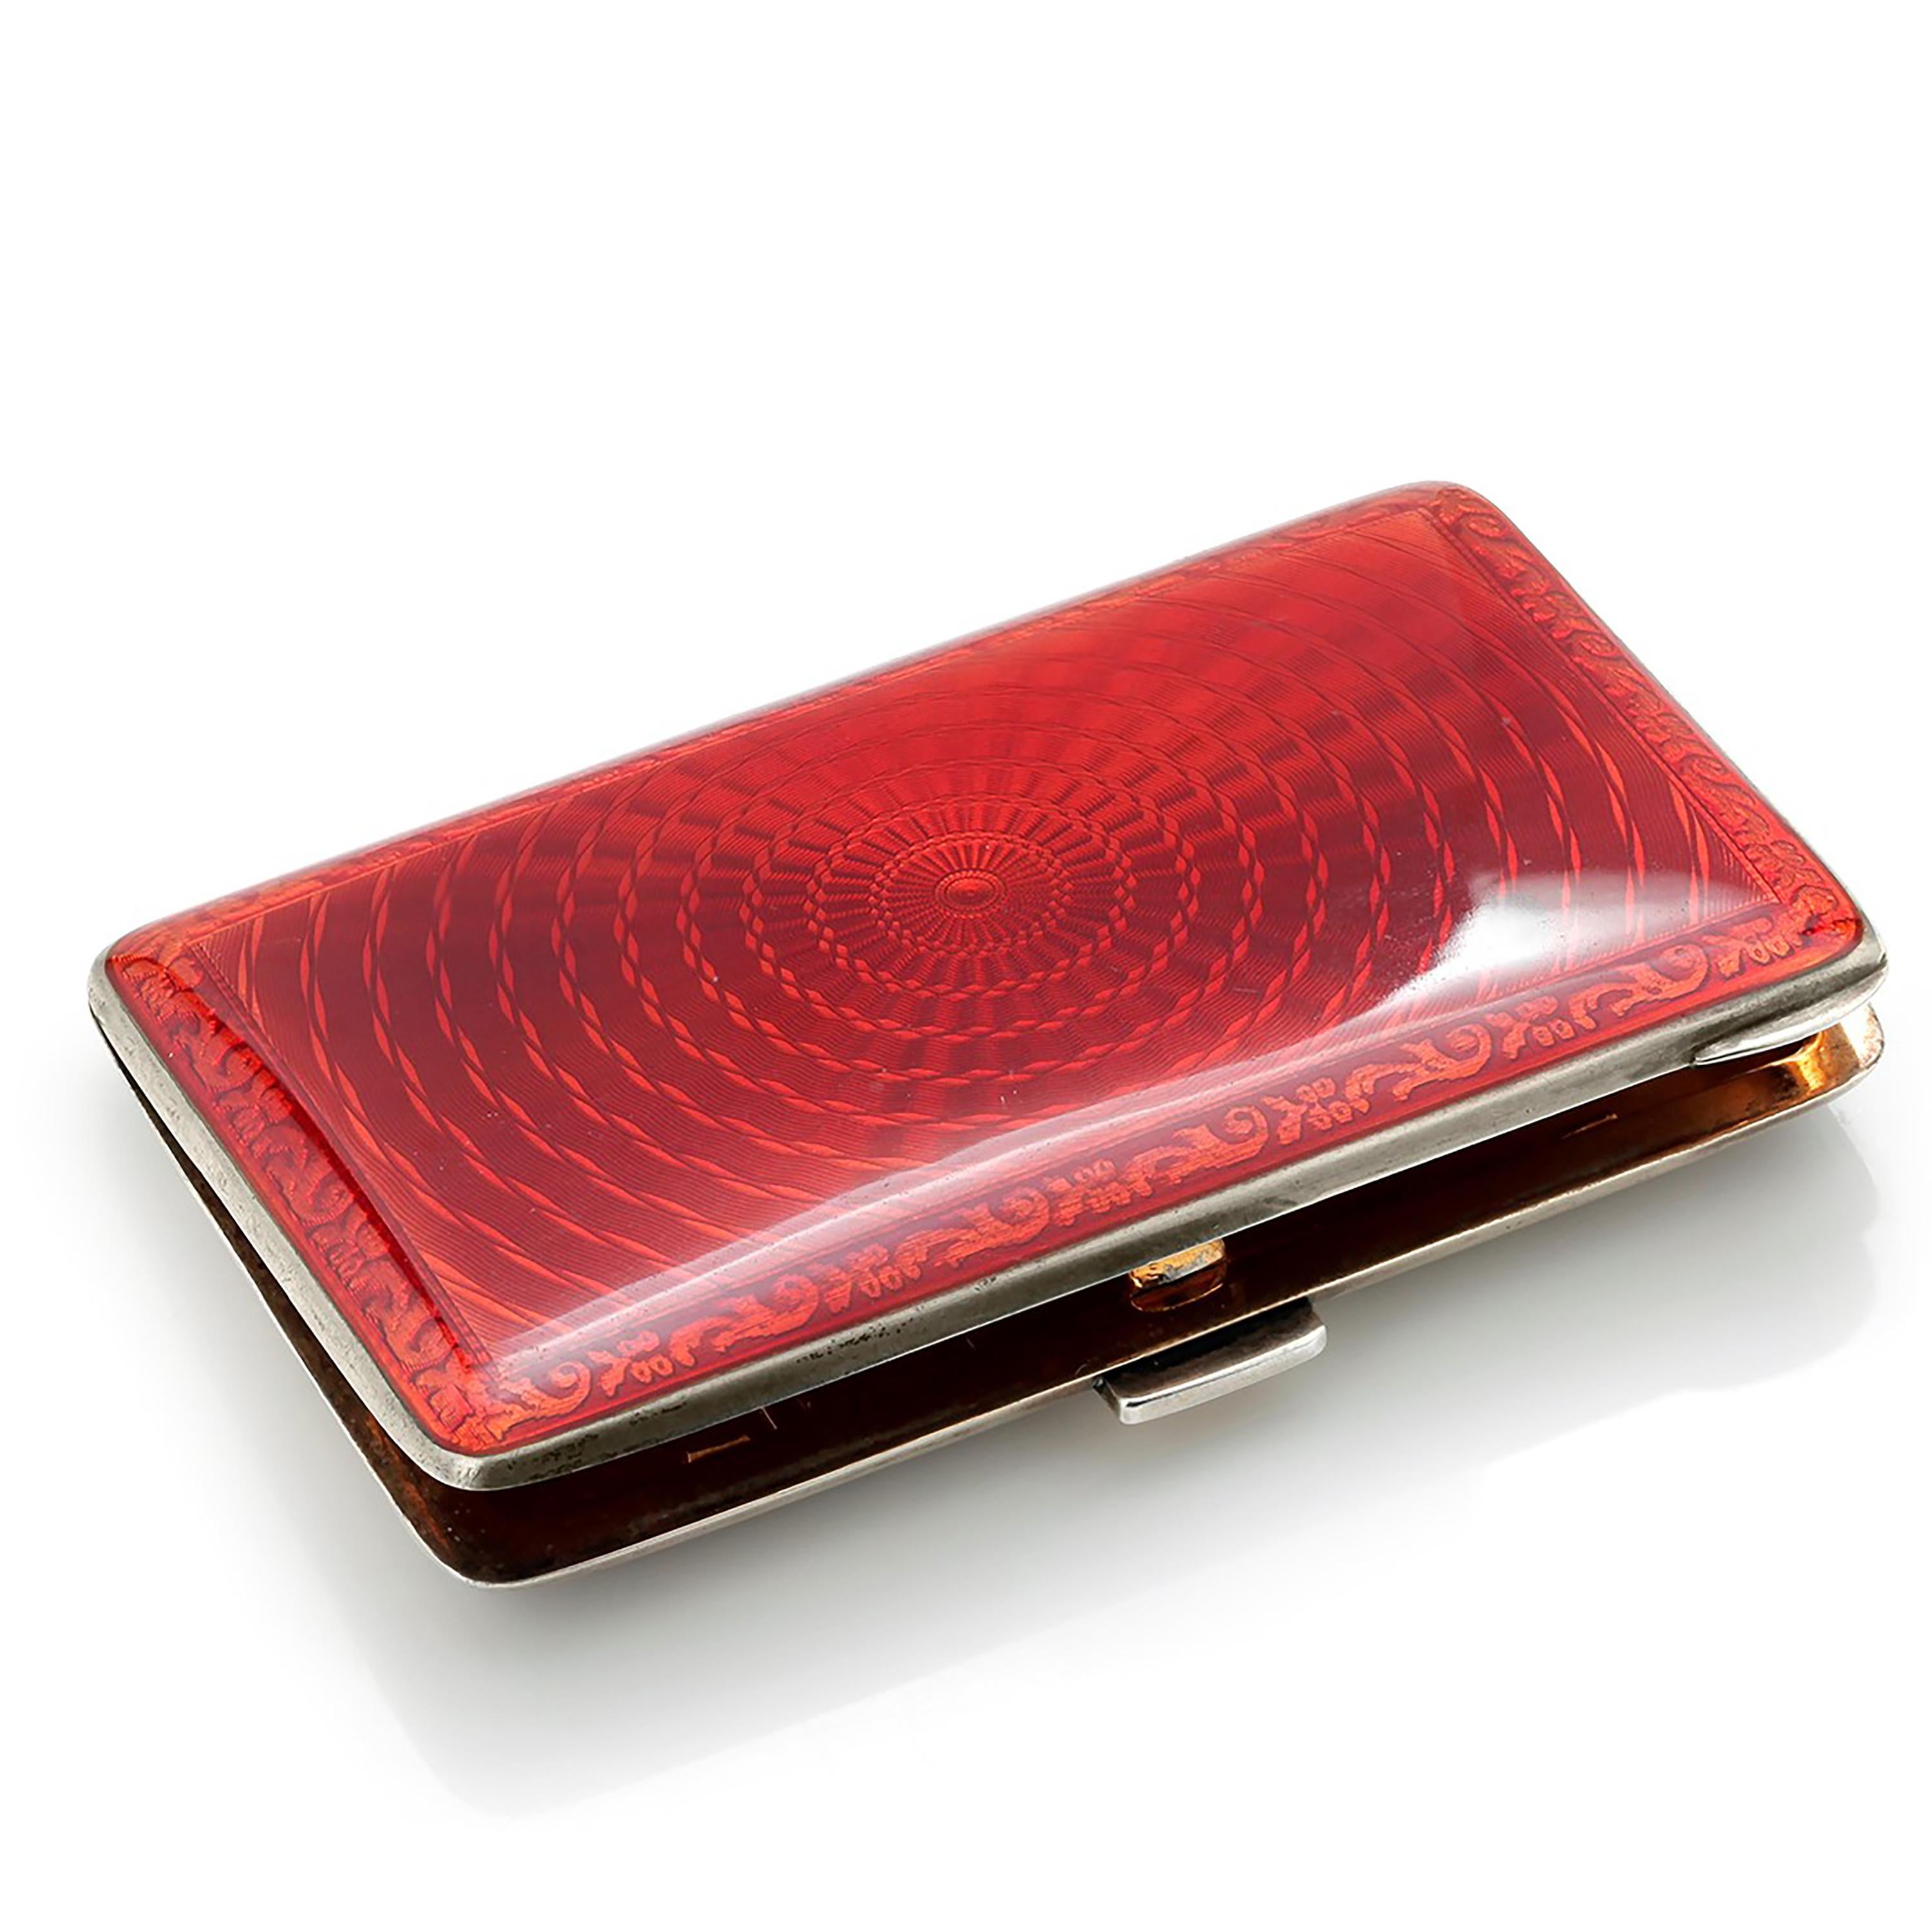 Vintage 20 Century Rare Silver Guilloche Translucent Red Enamel Cigarette Case In Good Condition For Sale In New York, NY